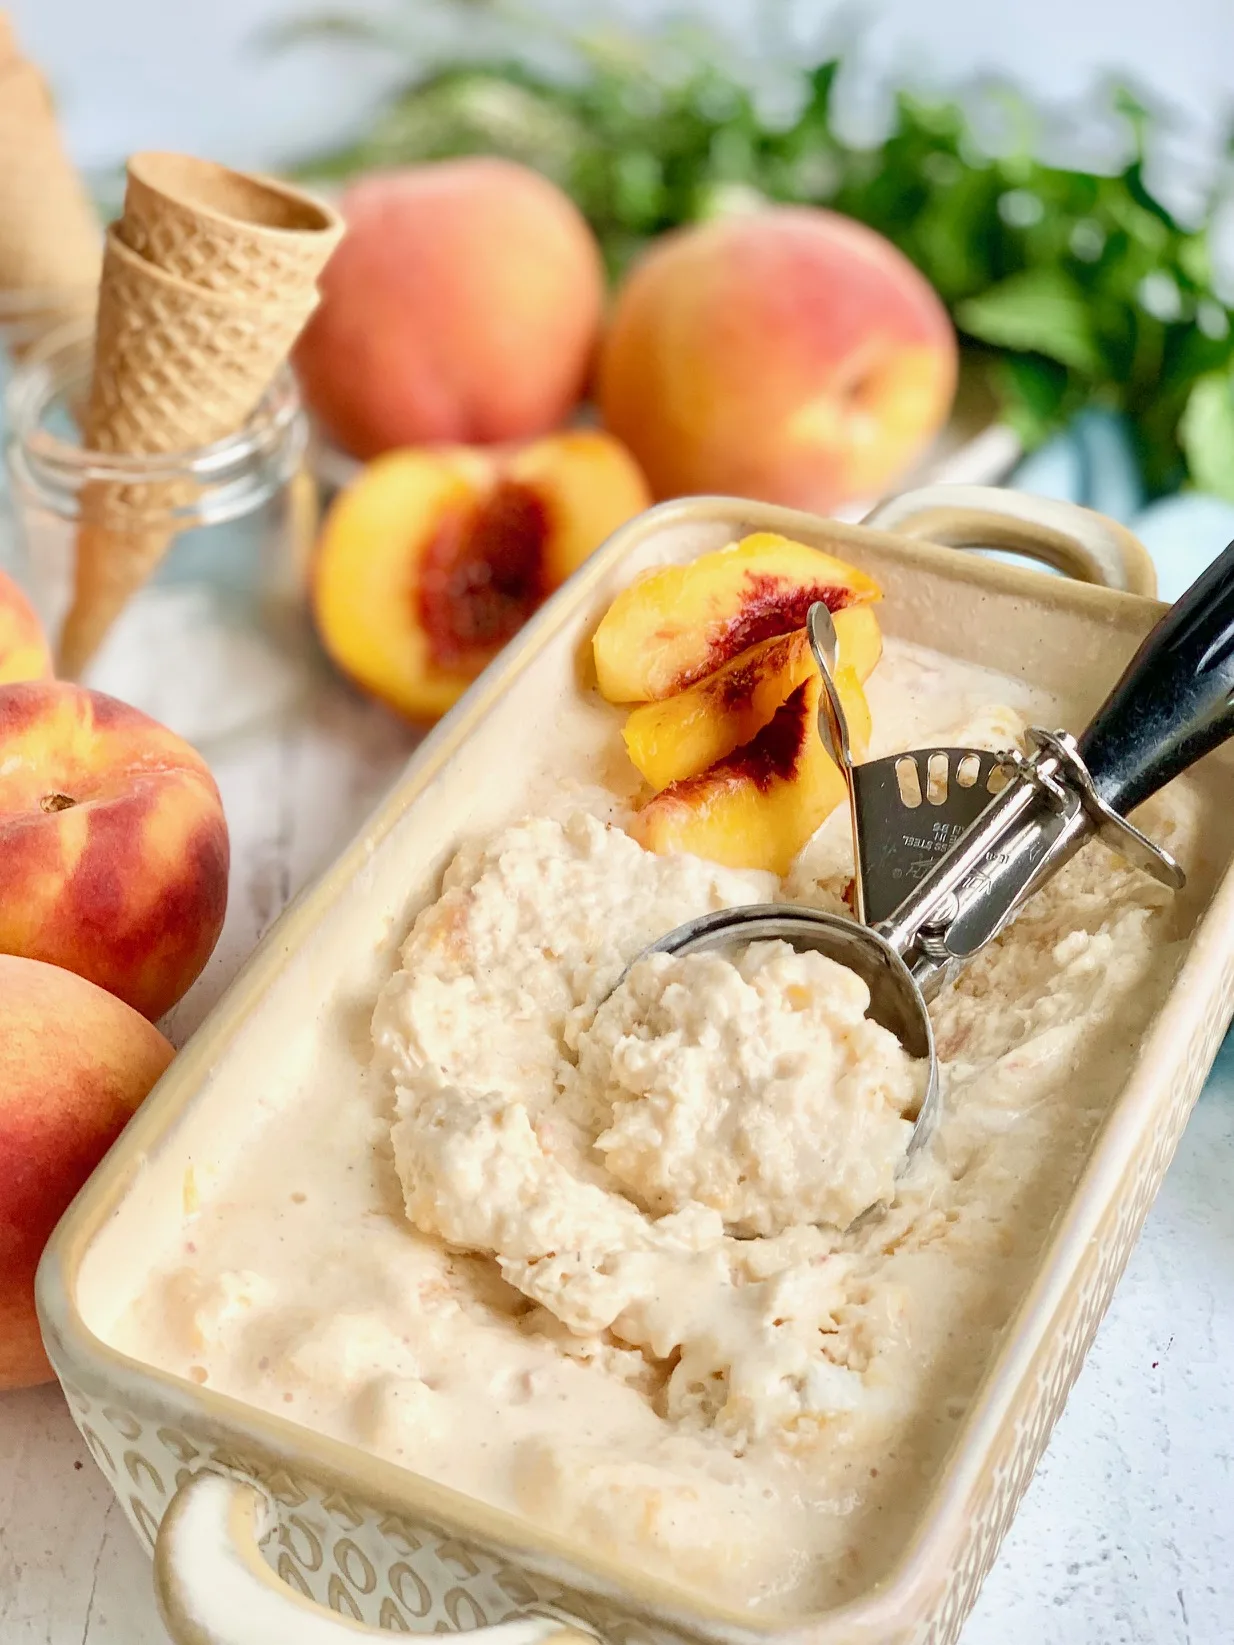 A bread loaf pan filled with frozen peach colored ice cream next to several fresh peaches. An ice cream scoop is in the ice cream.